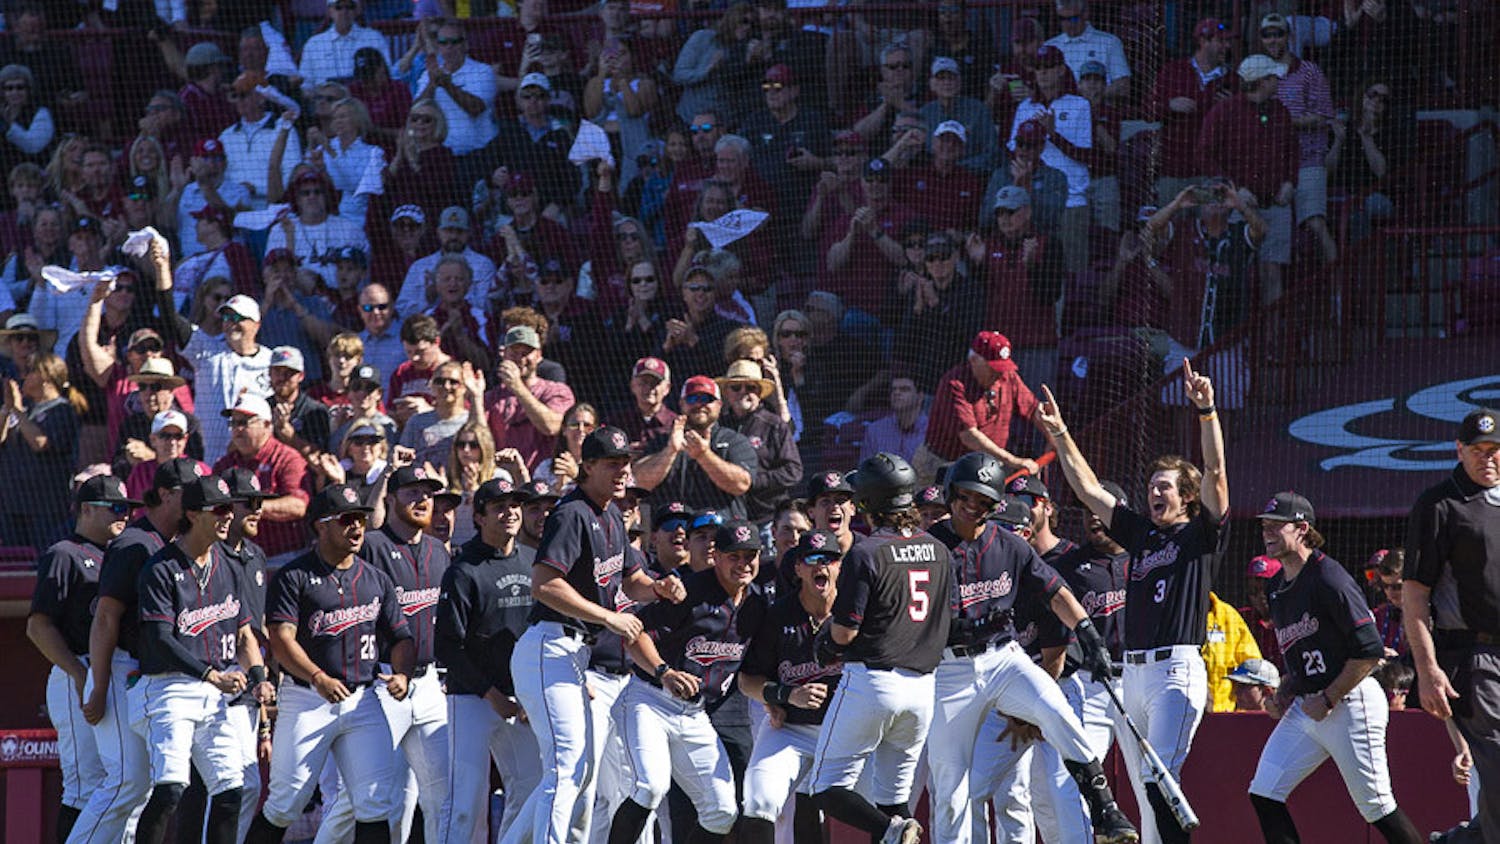 The South Carolina baseball team celebrates after junior first baseman Gavin Casas hits a home run in the fourth inning against Clemson at Founders Park on March 5, 2023. The Gamecocks beat the Tigers 7-1, defeating it 2-1 in the series.&nbsp;